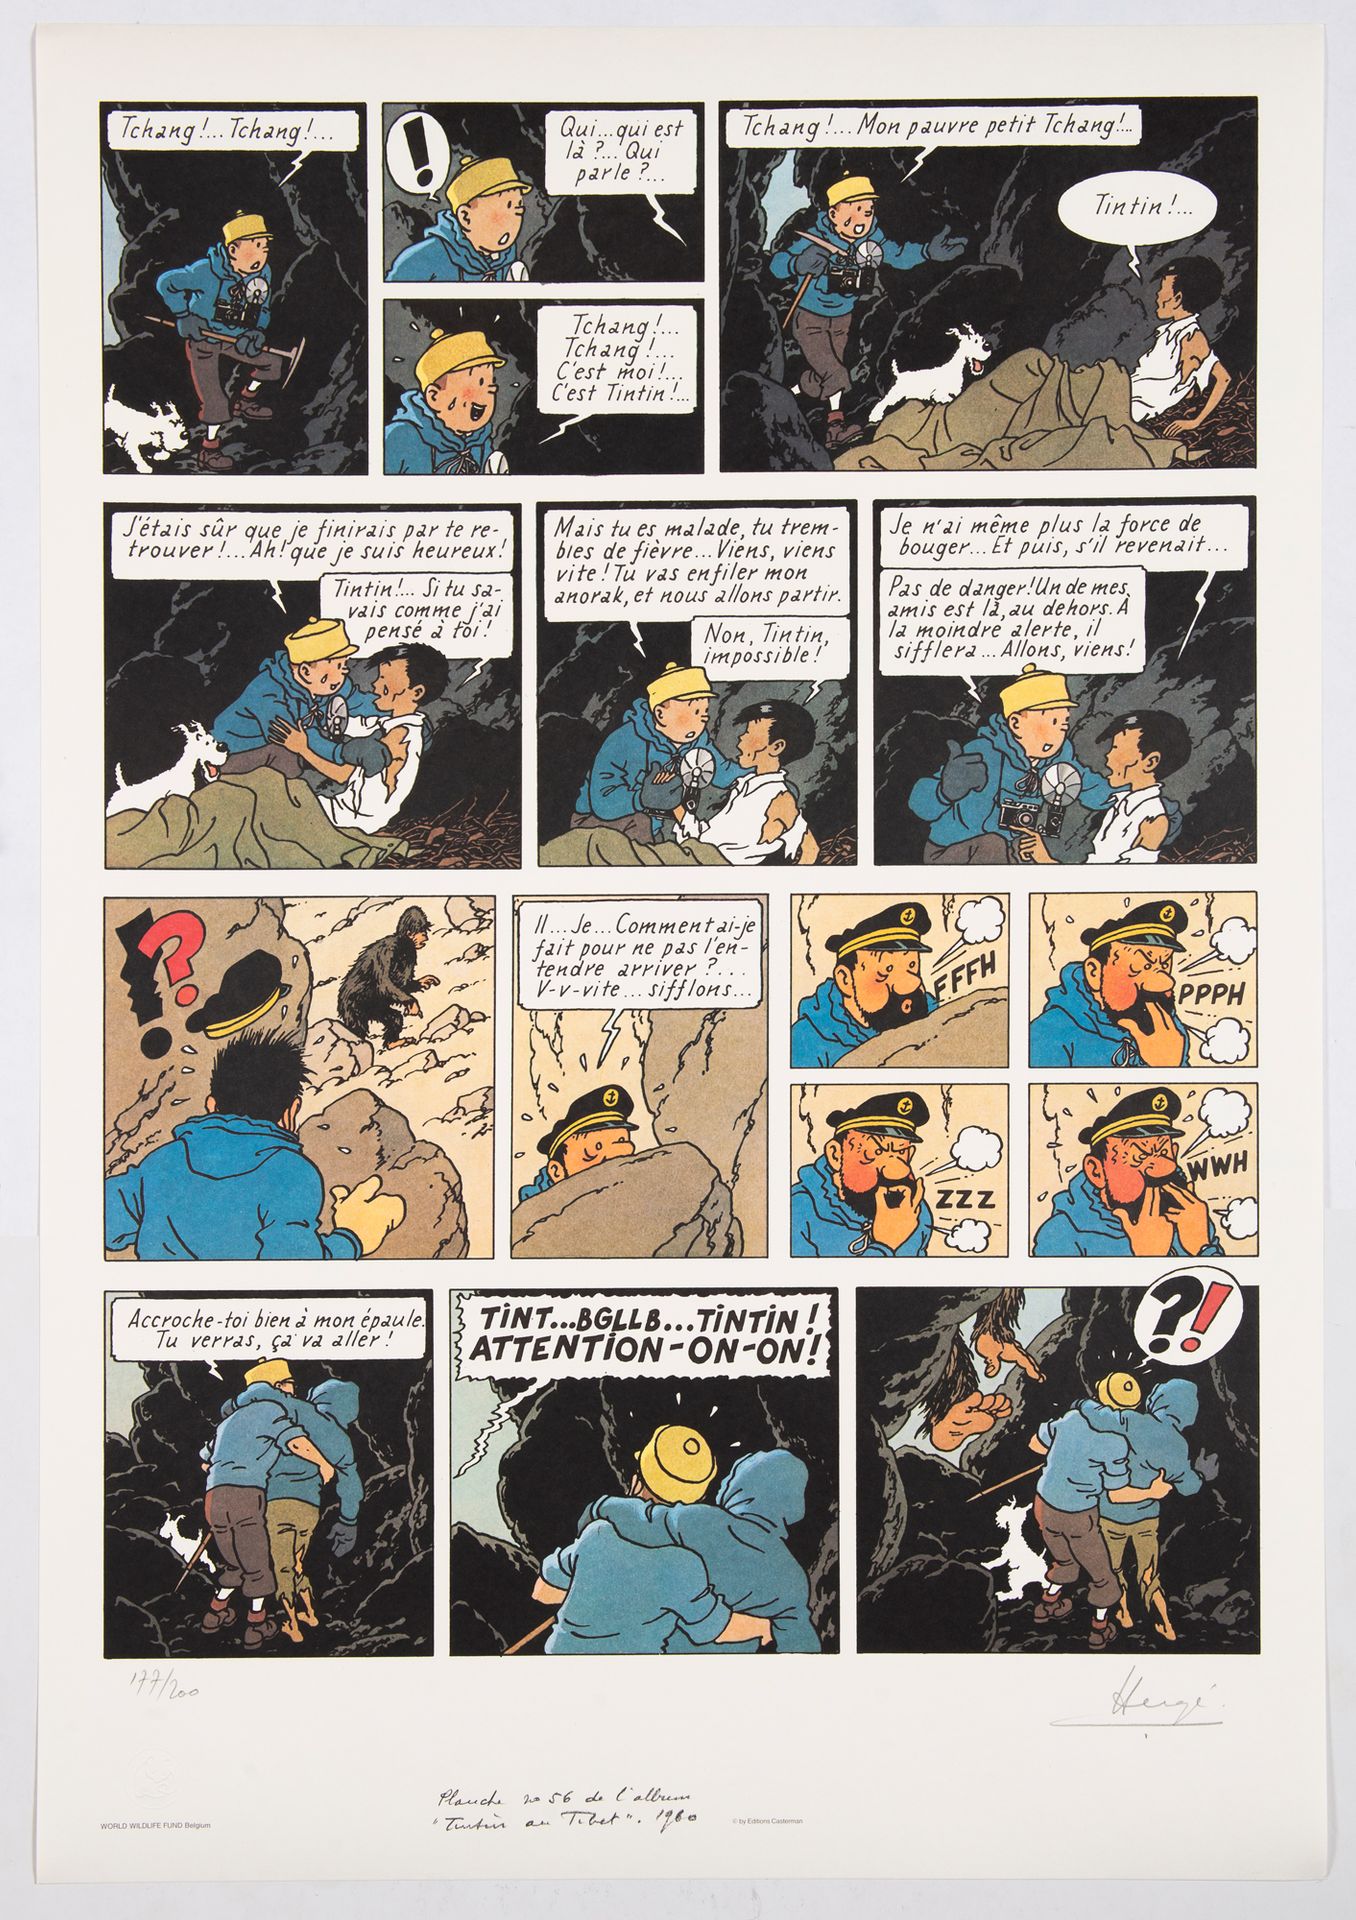 HERGÉ Serigraphy for the WWF : Superb serigraphy big size (70 x 100 cm) from Tin&hellip;